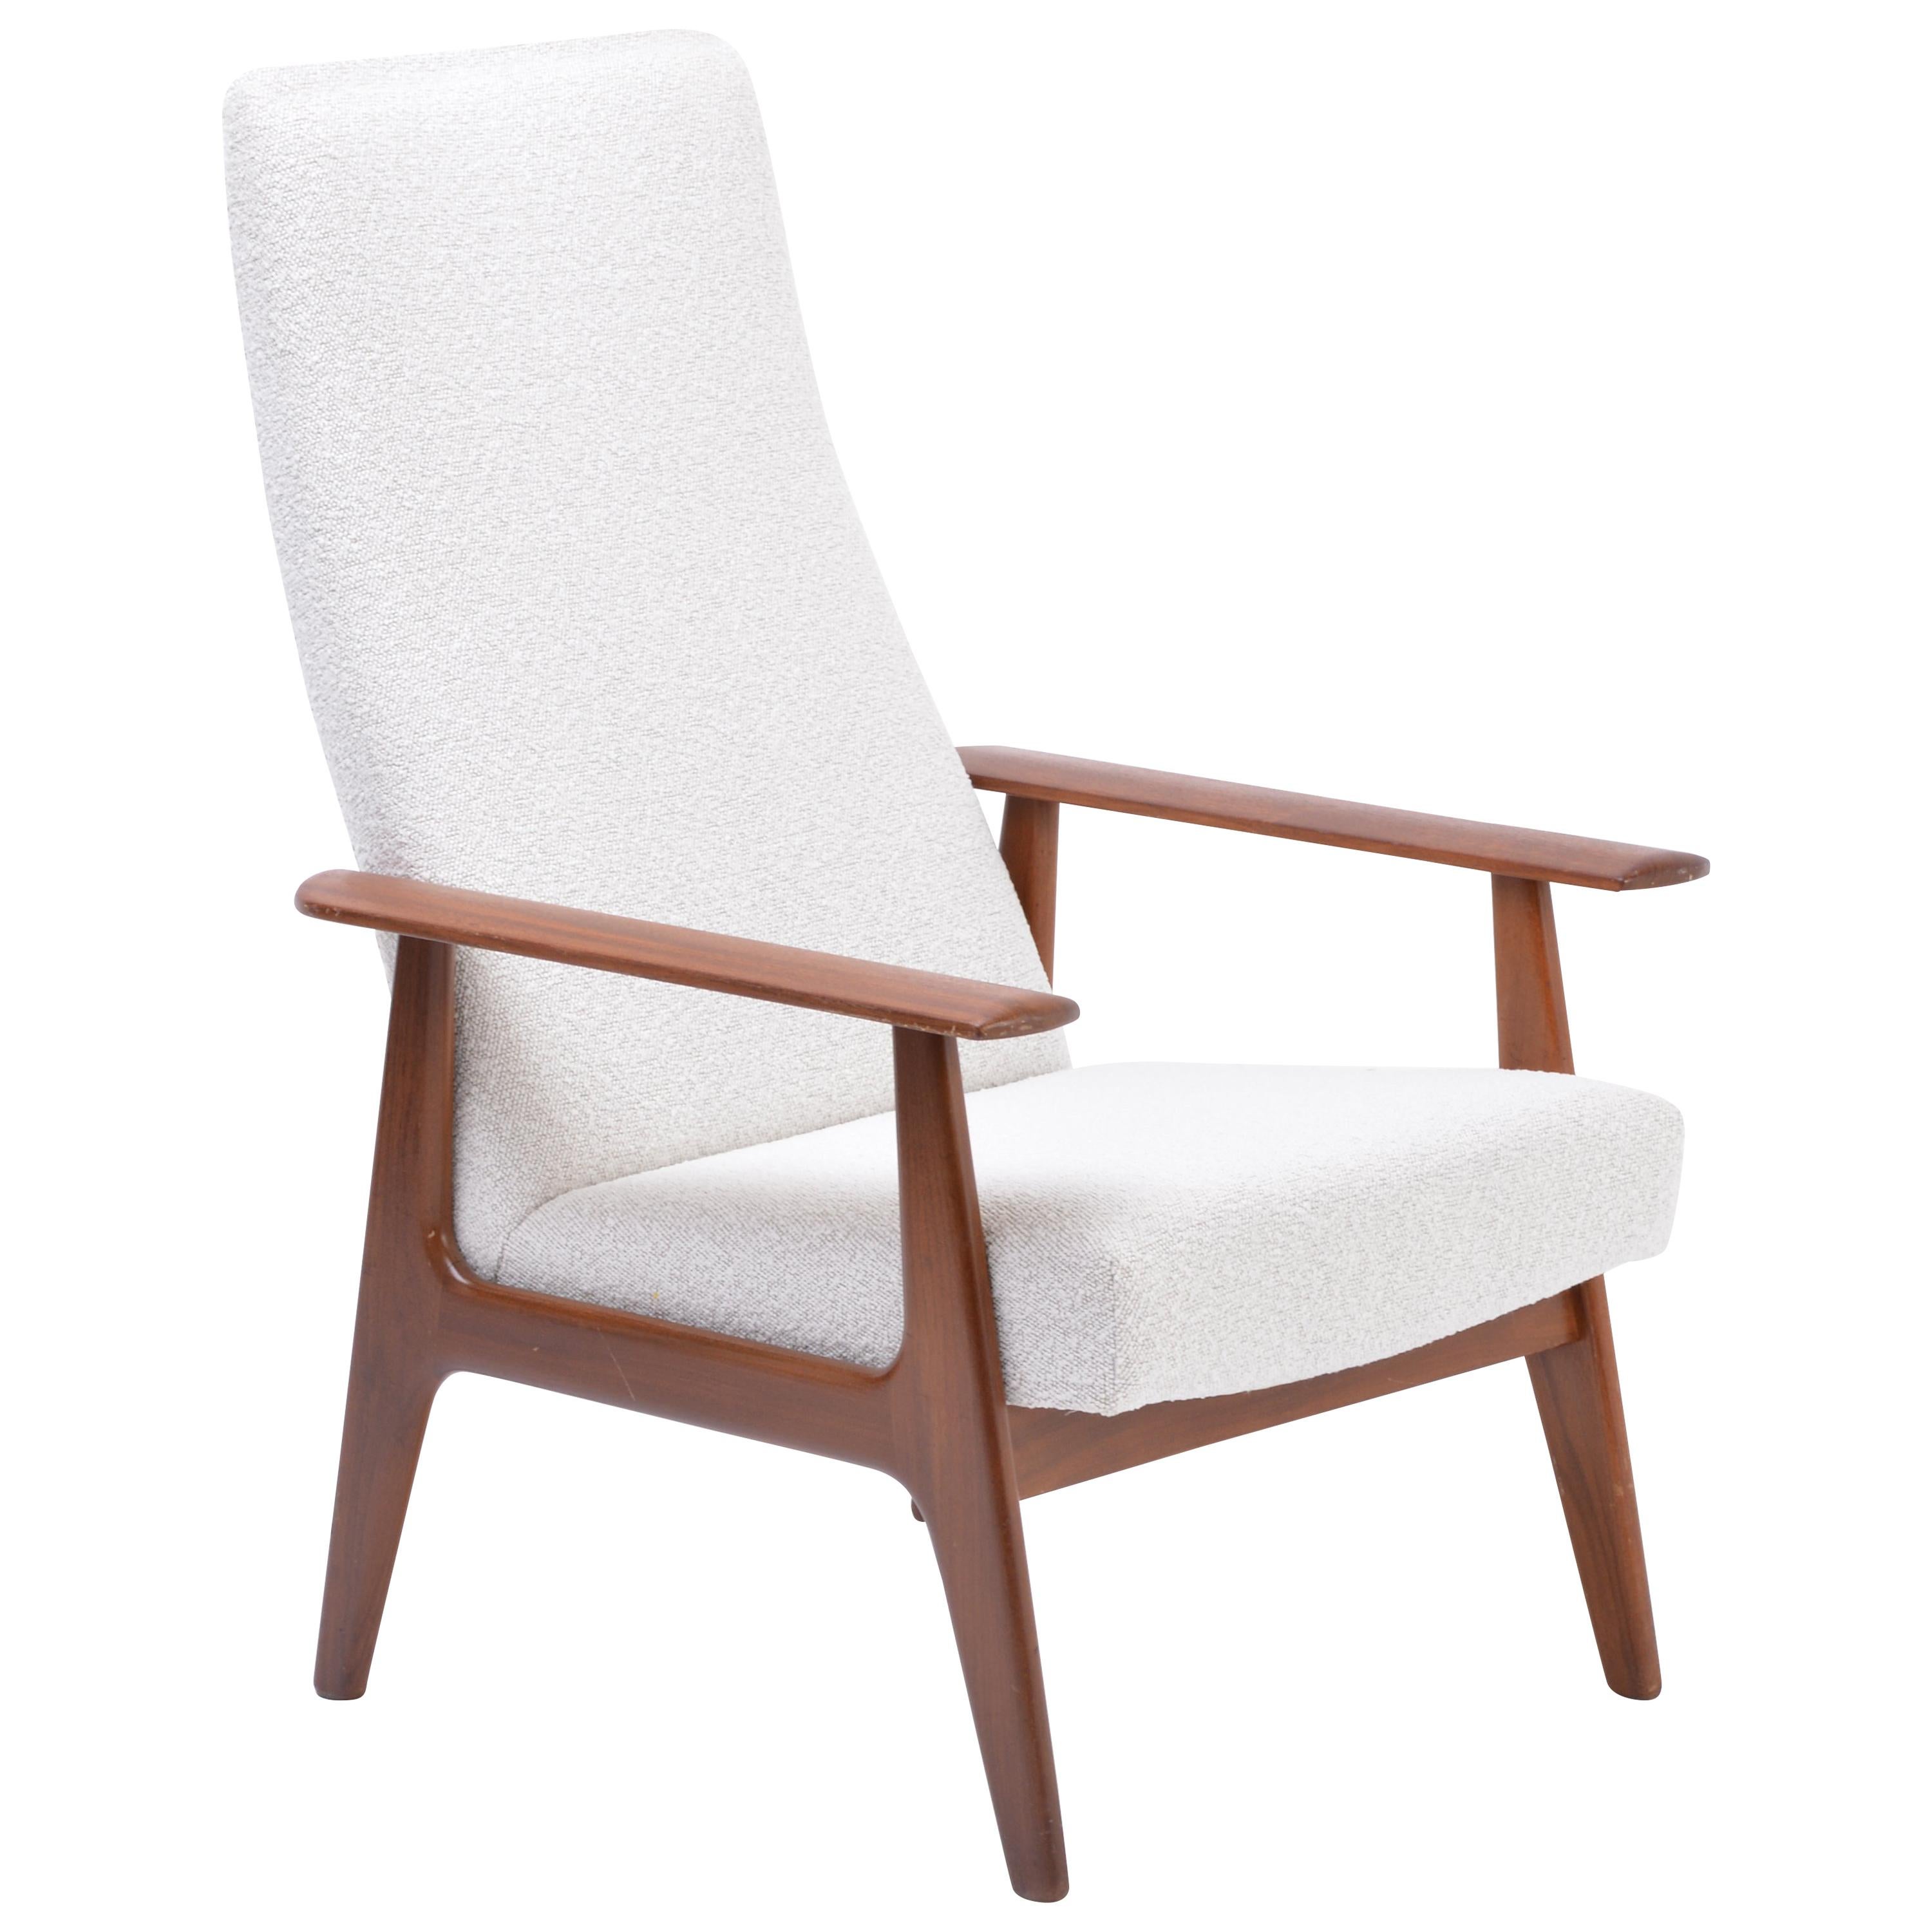 Dutch Mid-Century Modern Teak lounge chair by Topform reupholstered in Bouclé For Sale